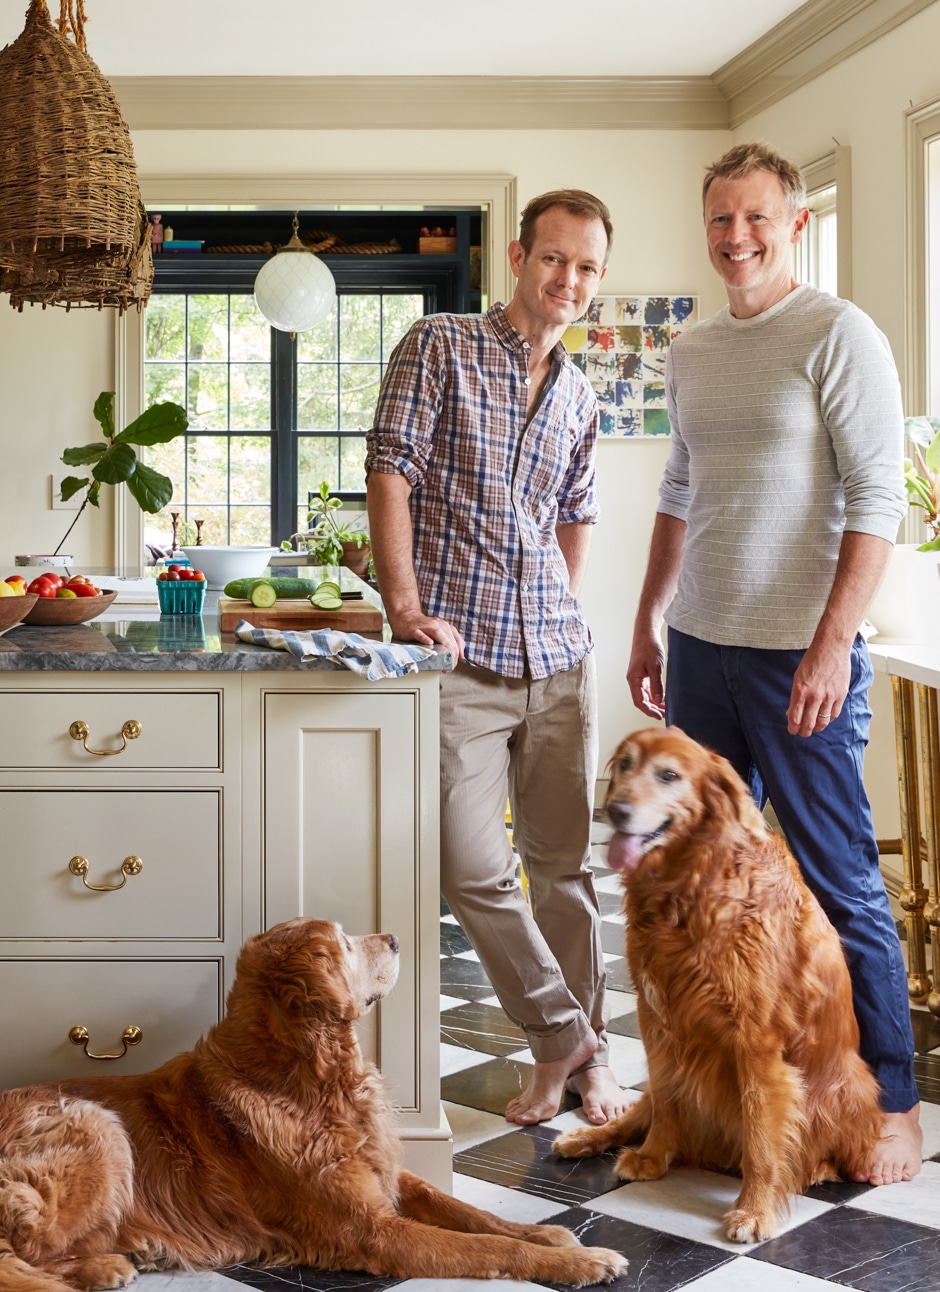 Joe and Dale standing in sunny kitchen with two golden retrievers